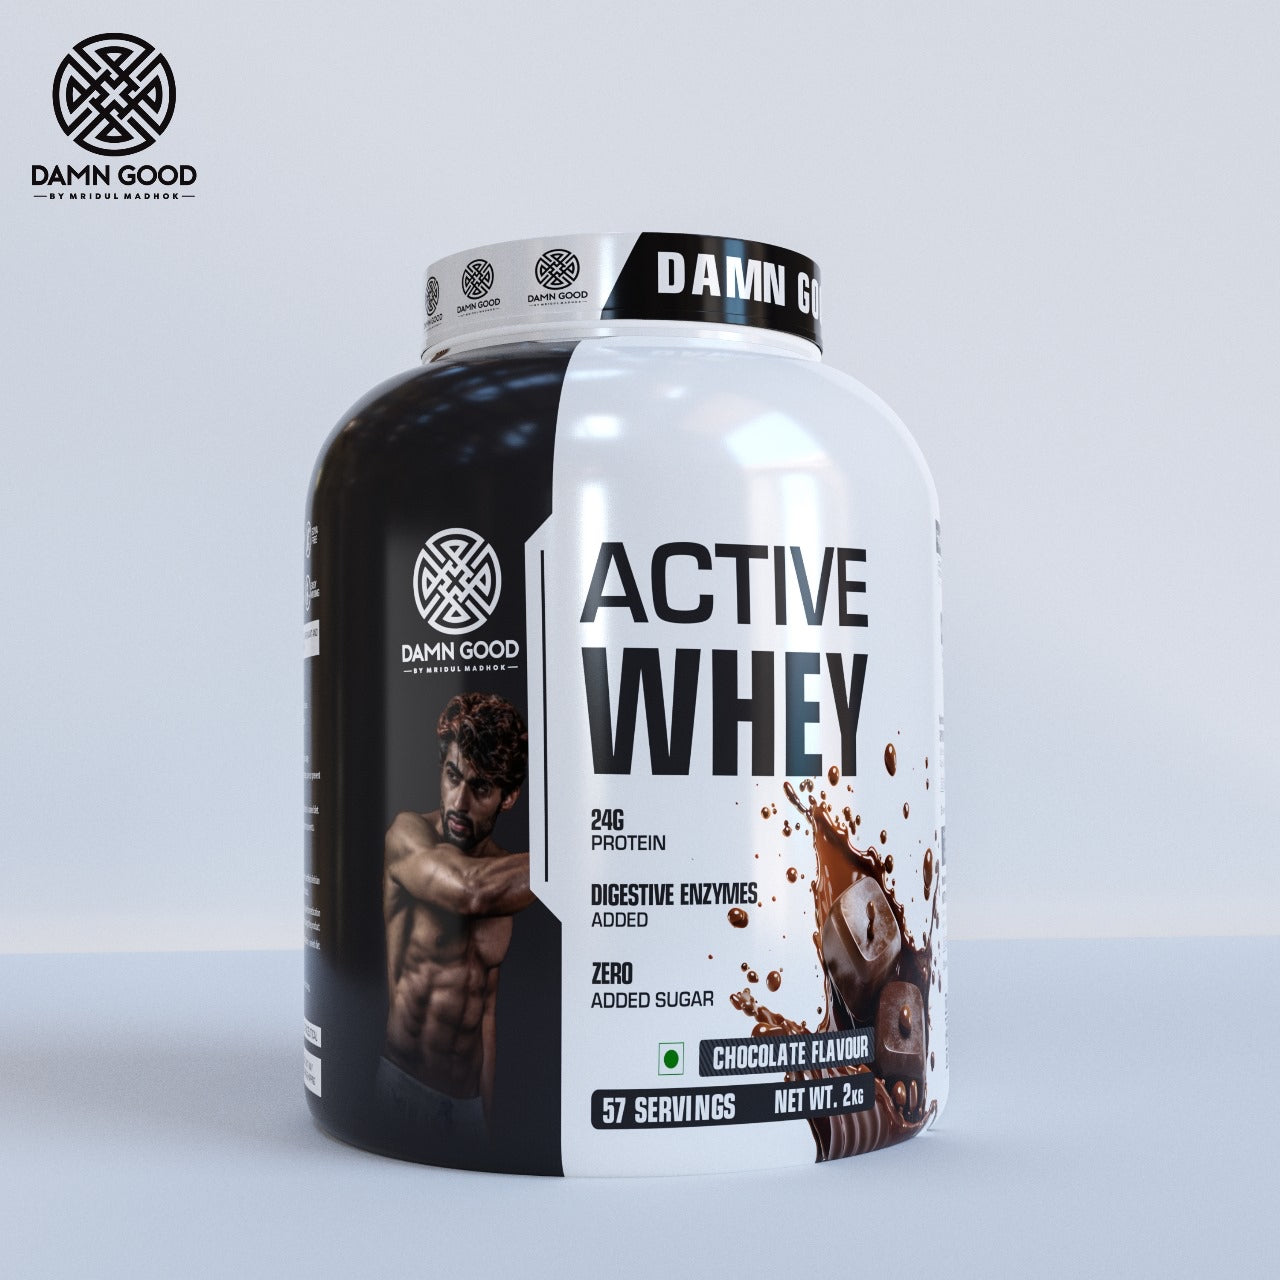 Damngood Active Whey Protein - Chocolate Flavour 5 Lbs